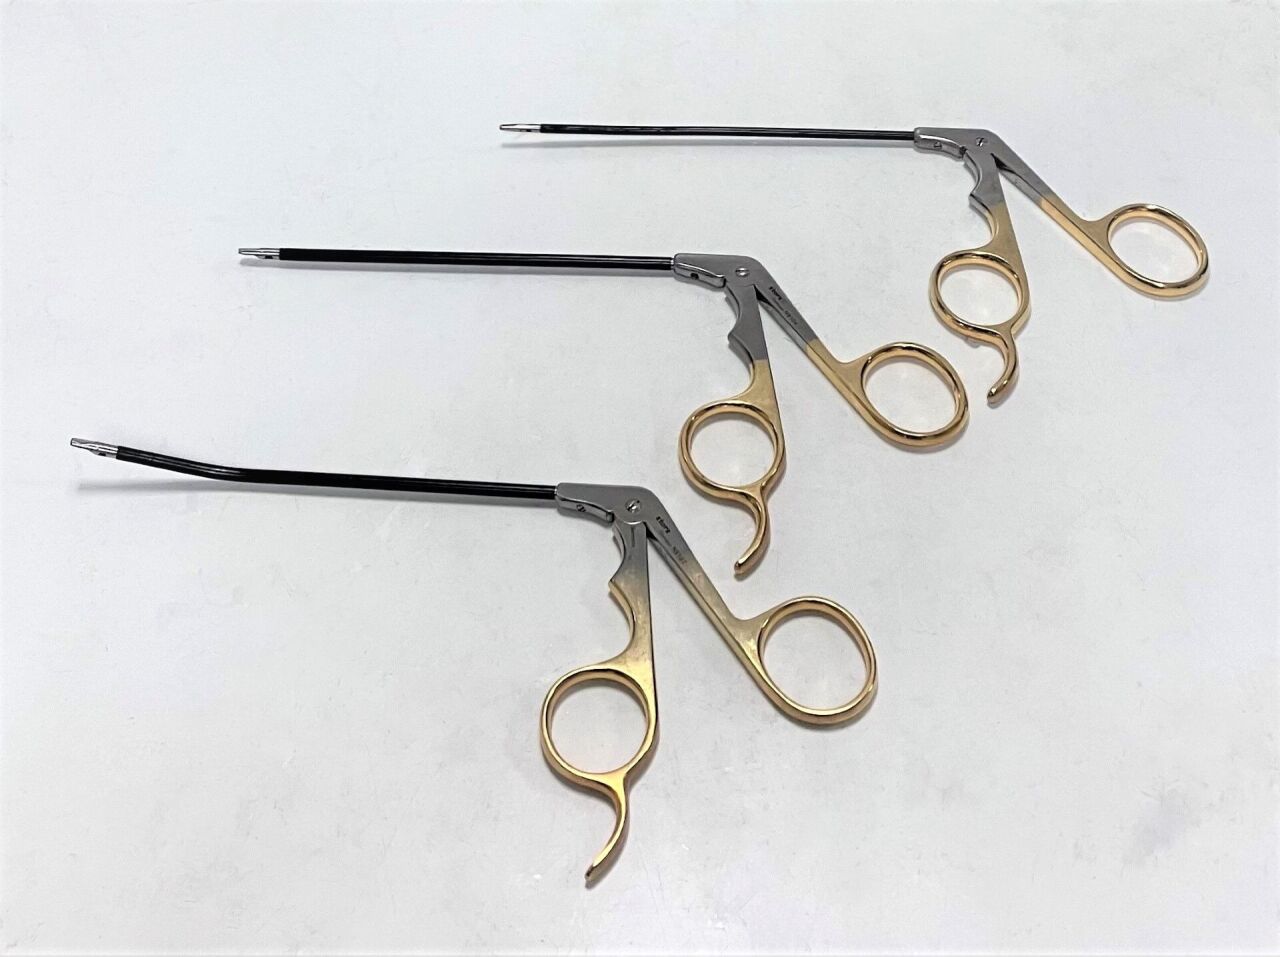 Used Storz N9101 N9104 N9107 Daniel Endoforehead Instrument Set Of 3 Surgical Instruments For